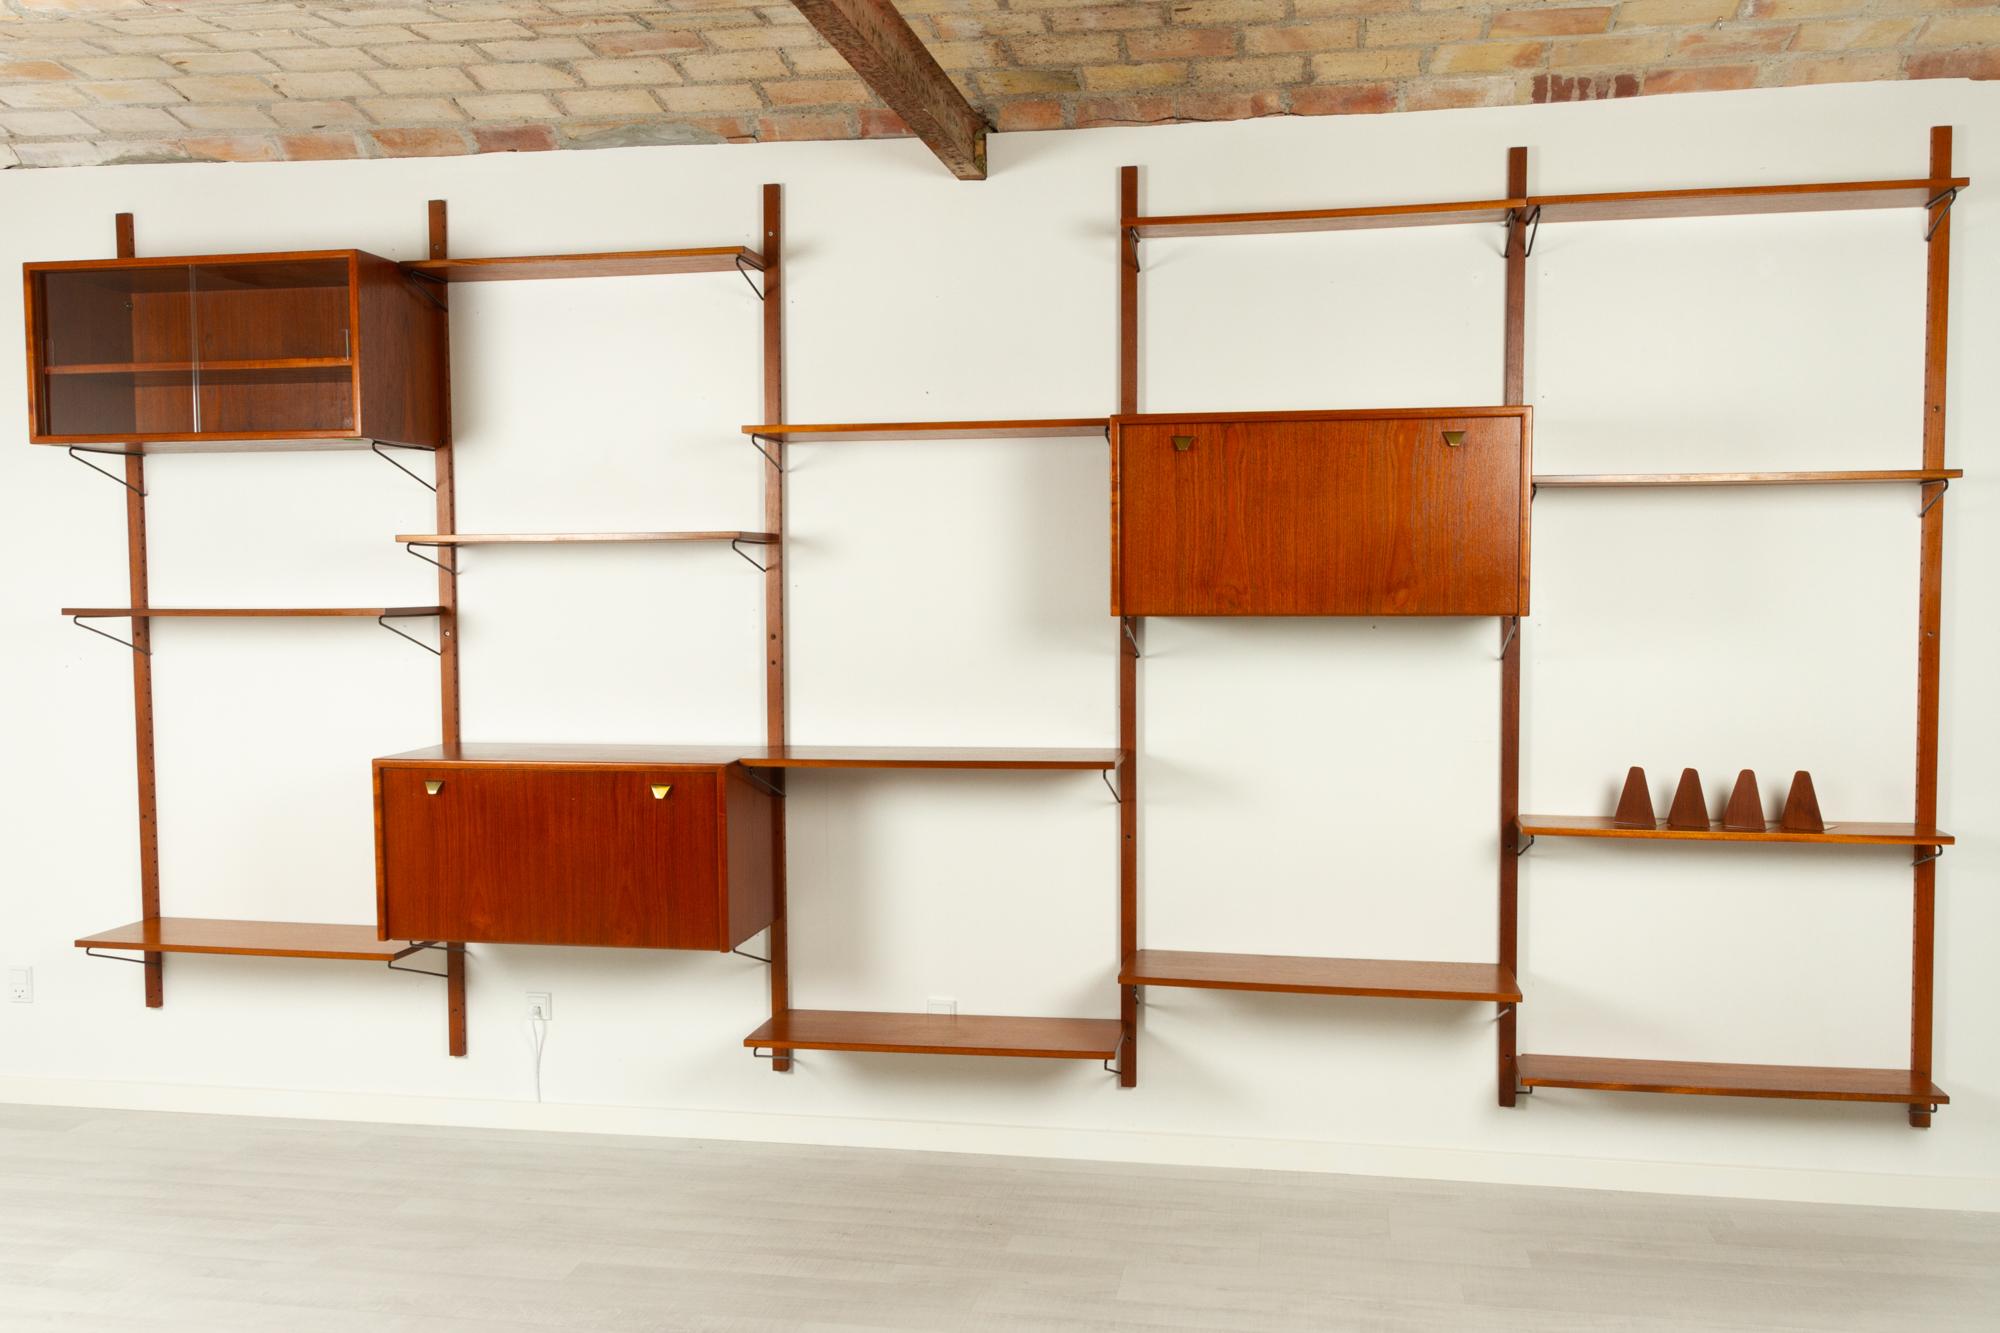 Vintage Danish modular teak wall unit by Kurt Østervig 1960s
Beautiful large and rare five bay shelving system designed by Danish designer Kurt Østervig and manufactured by KP Møbler Denmark.

This set consists of the following items:
- 5